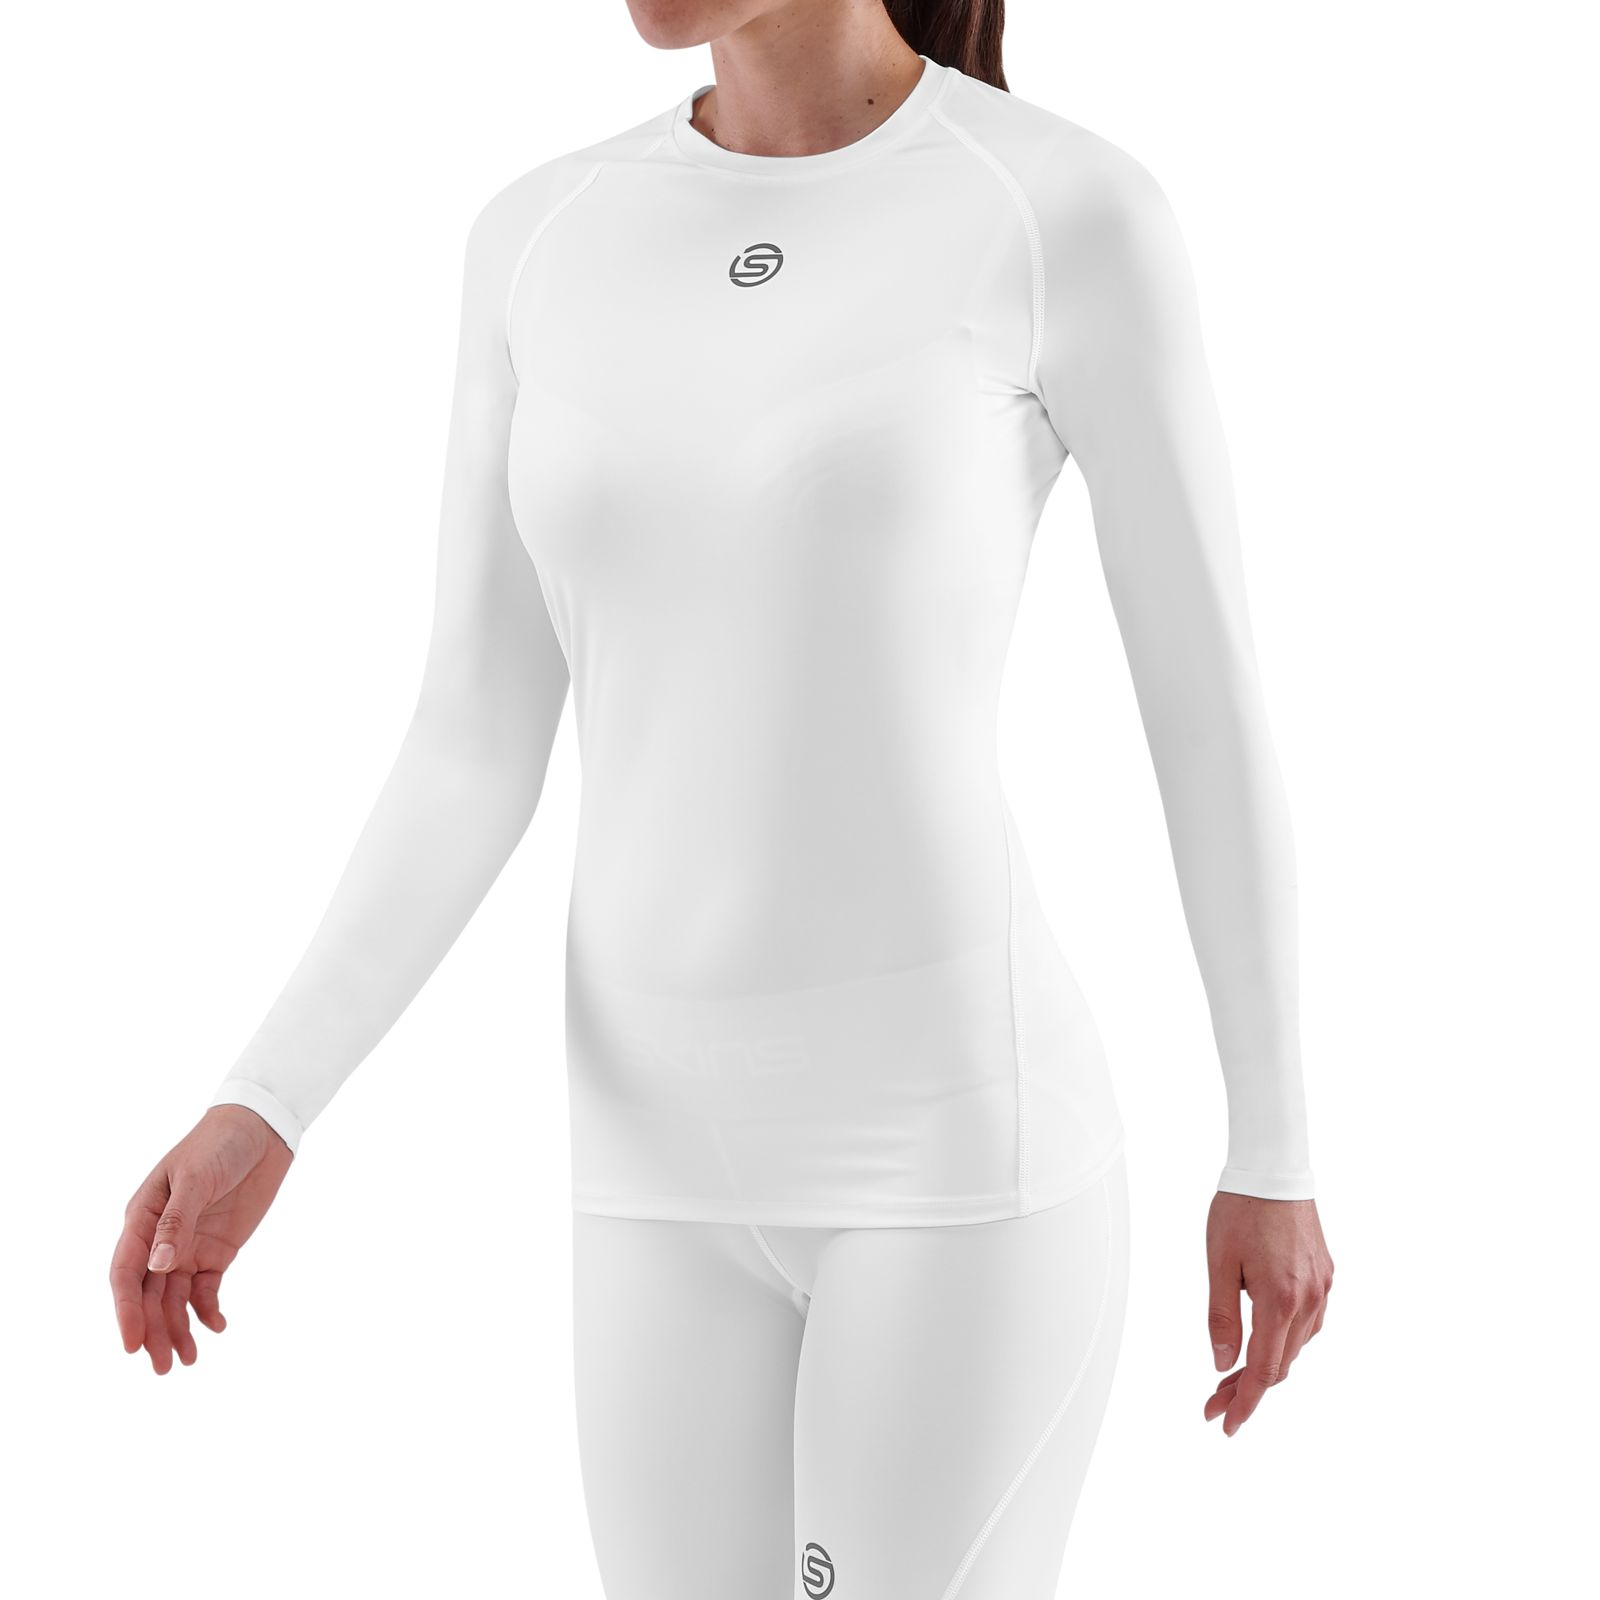 SKINS DNAMIC WOMEN COMPRESSION LONG SLEEVE TOP - BLACK/LIMONCELLO